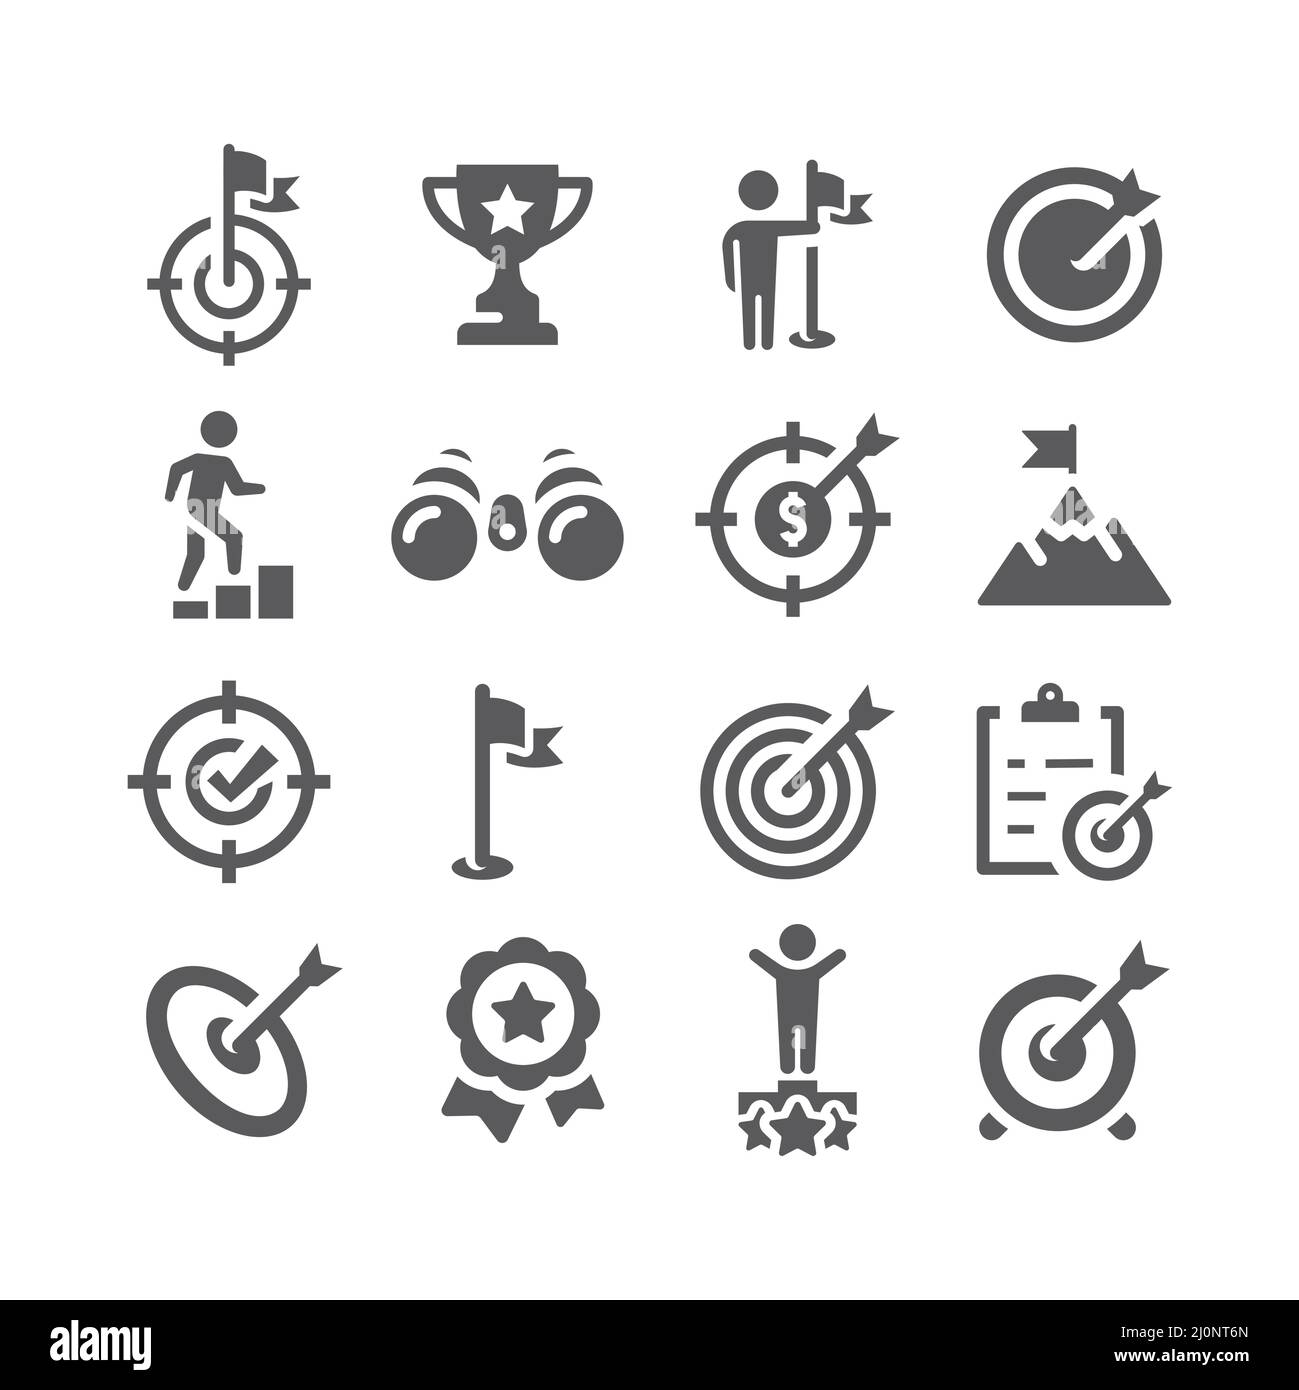 Business goal and achievement vector icon set. Peak, flag, target and arrow filled icons. Stock Vector